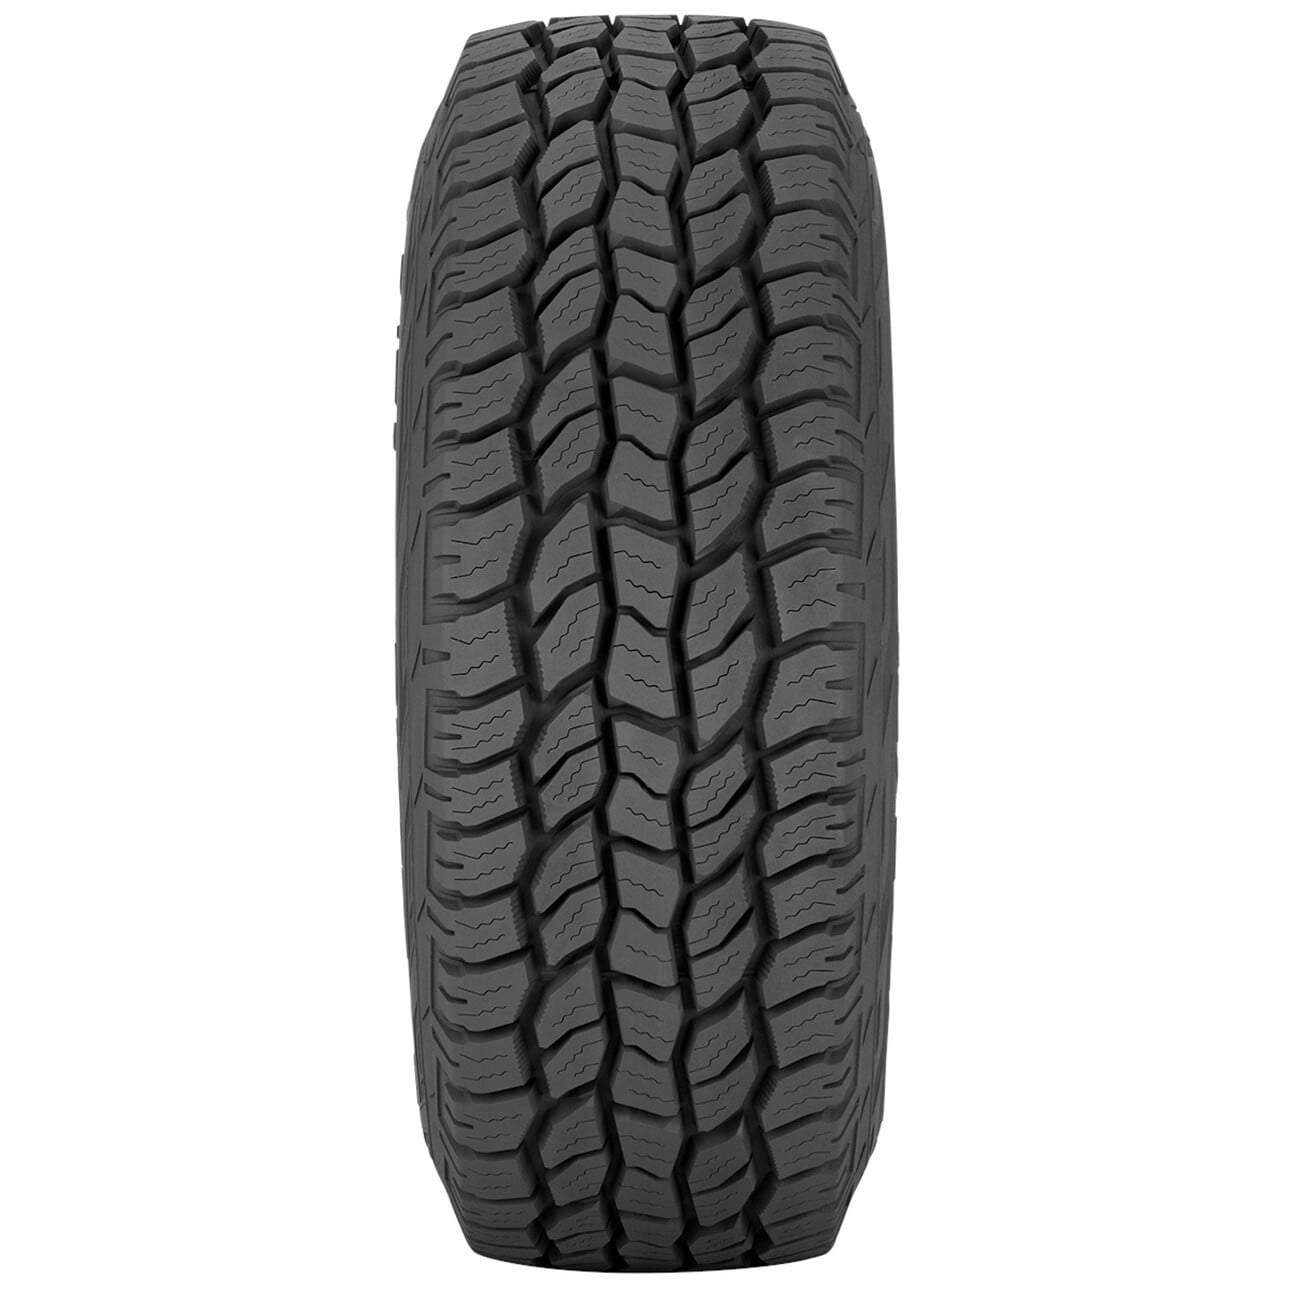 Cooper Discoverer A/T All-Season 235/75R15 105T Tire